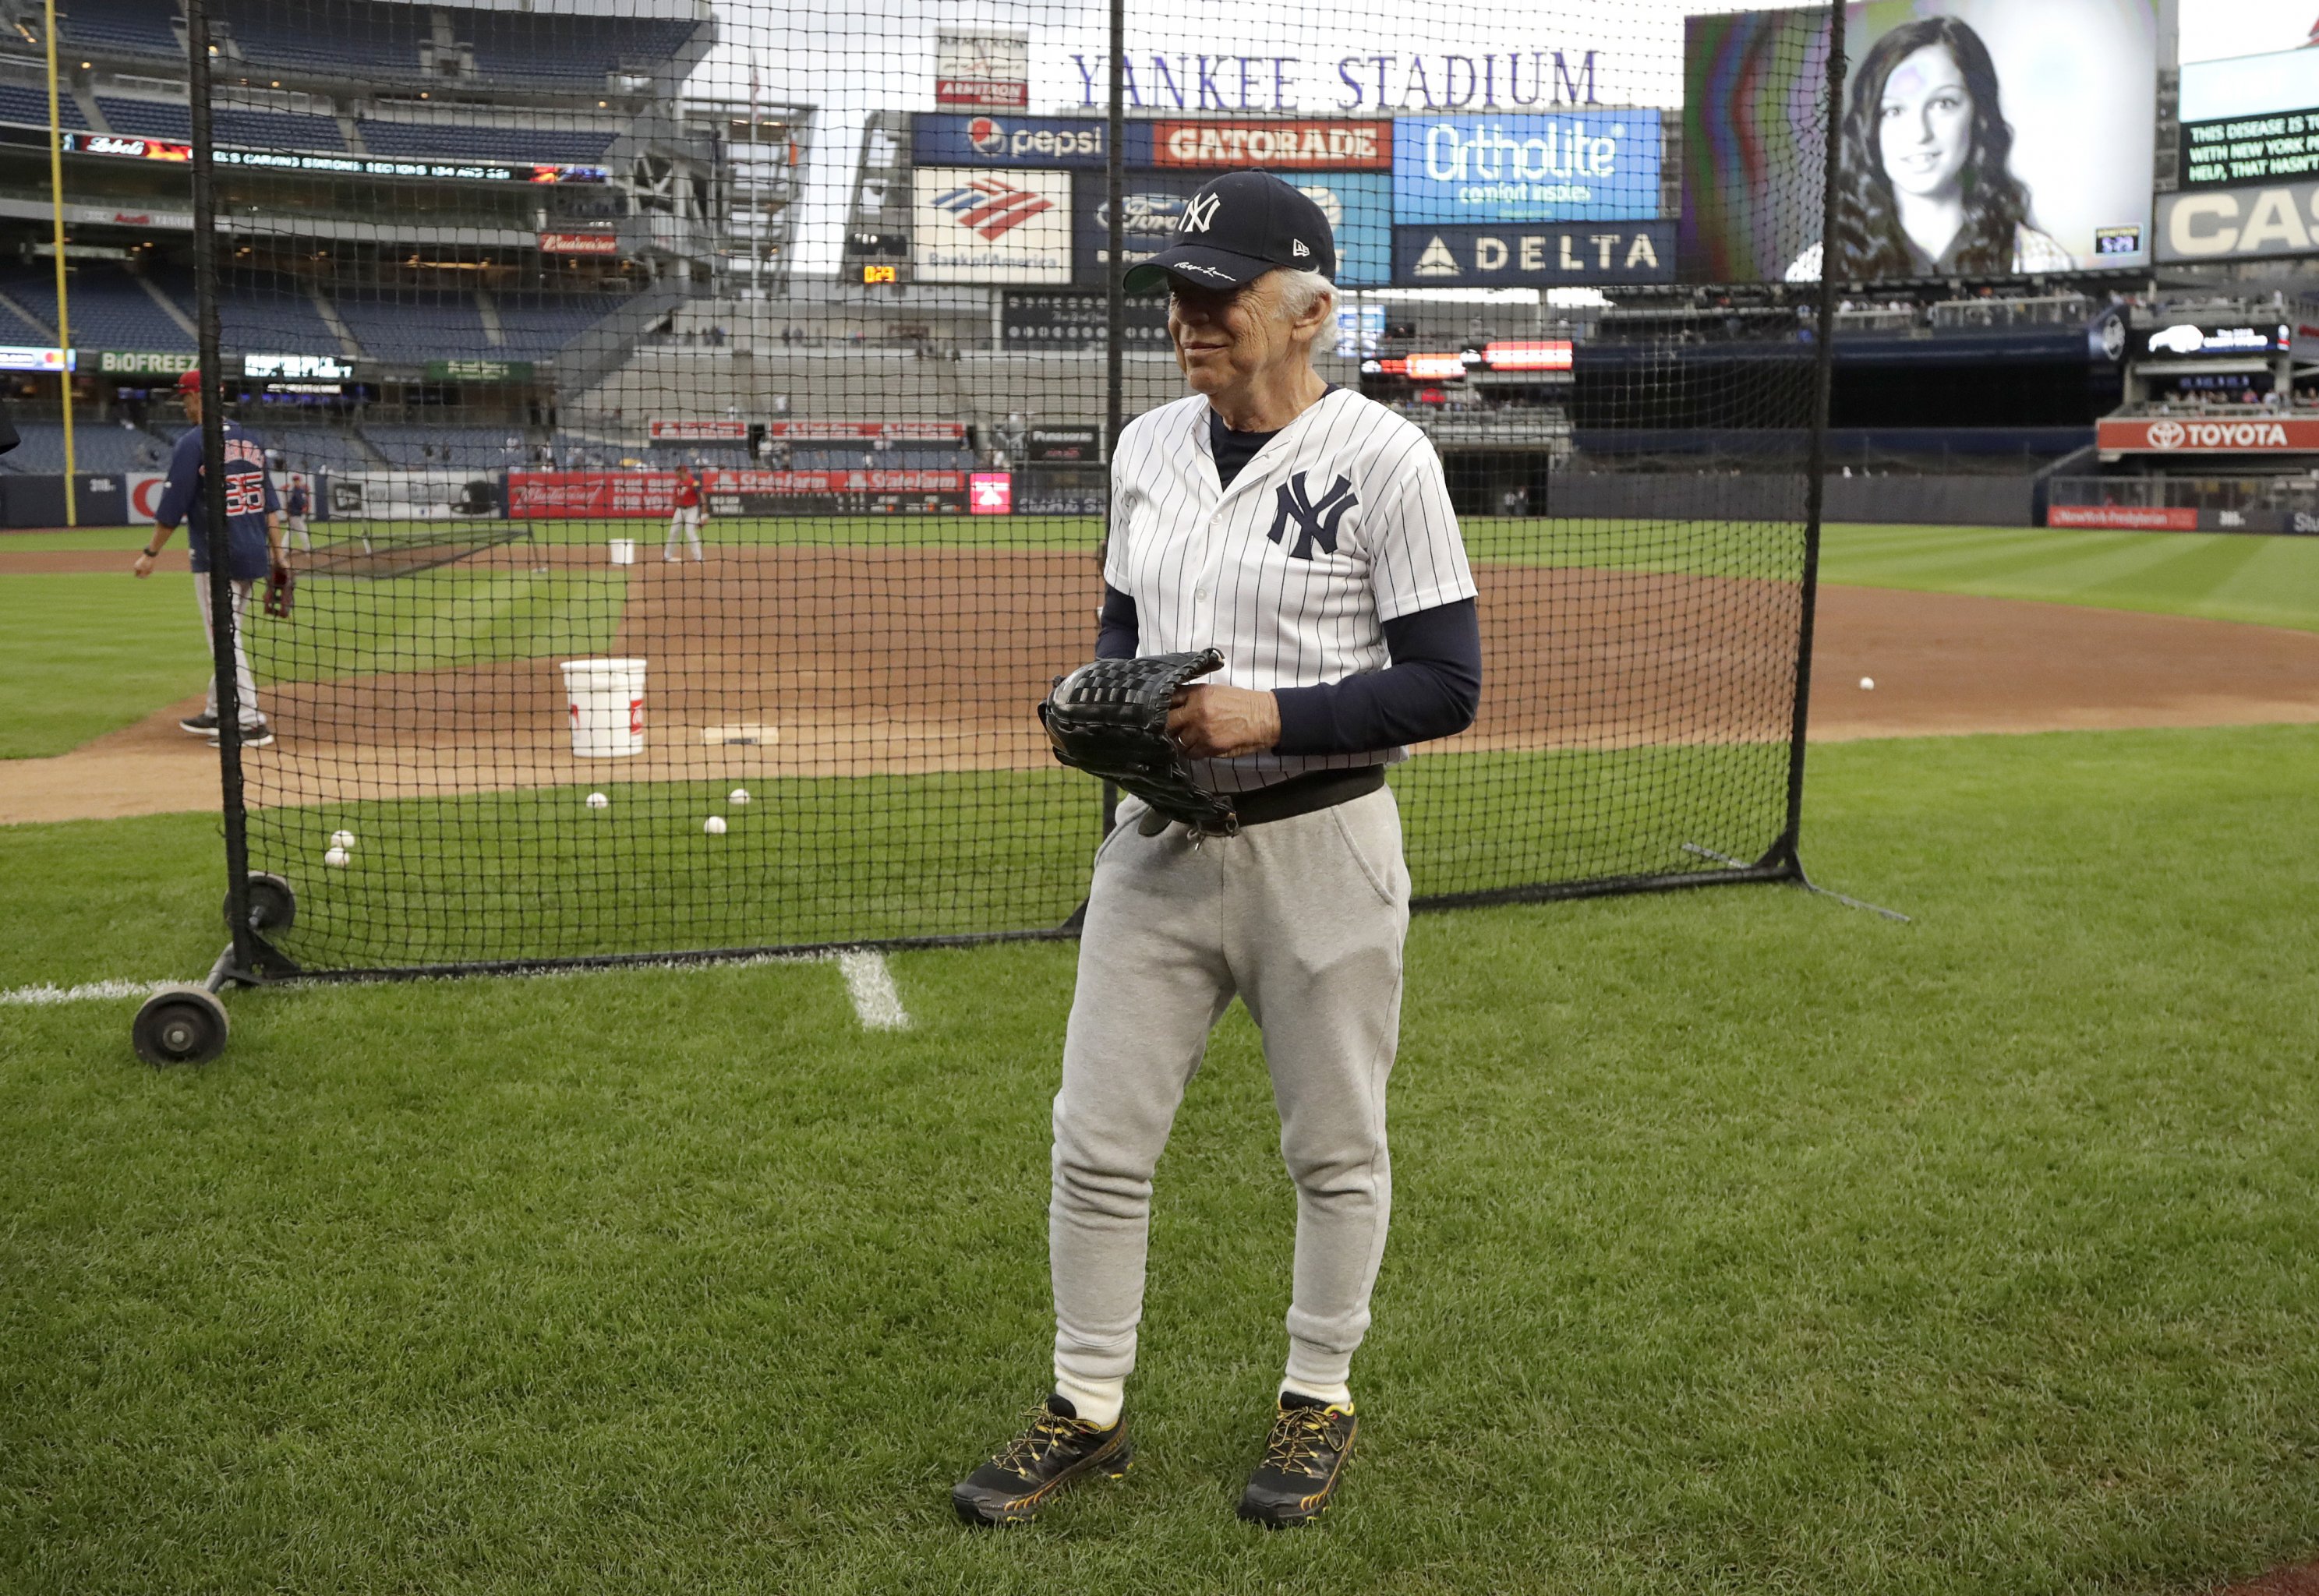 Ralph Lauren throws out the first pitch at Yankee Stadium 